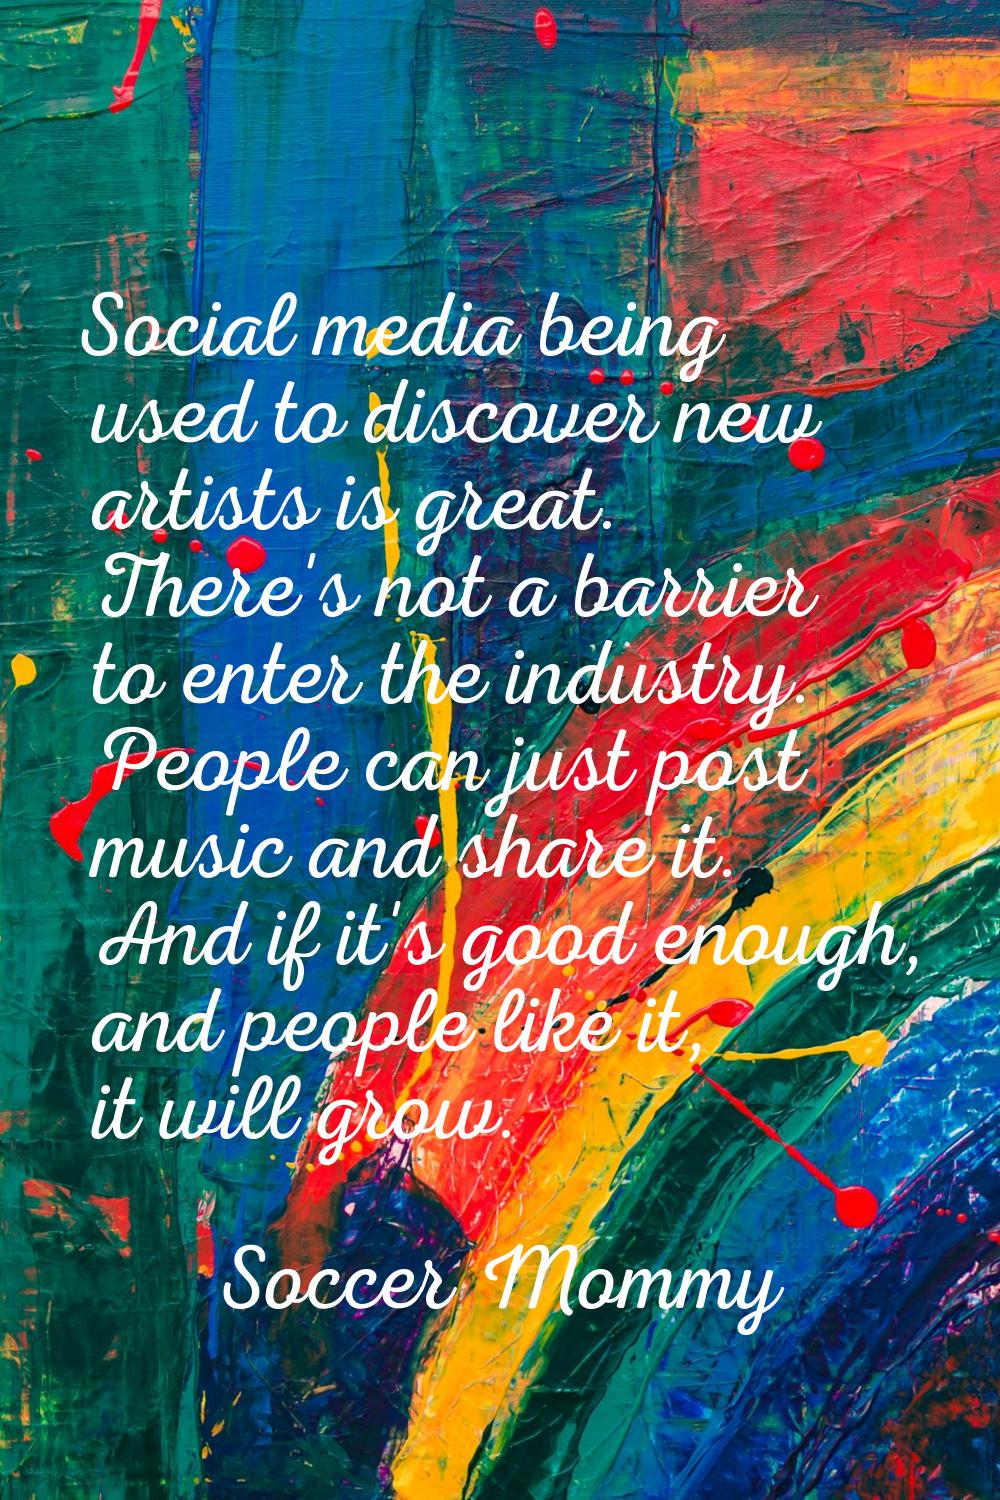 Social media being used to discover new artists is great. There's not a barrier to enter the indust